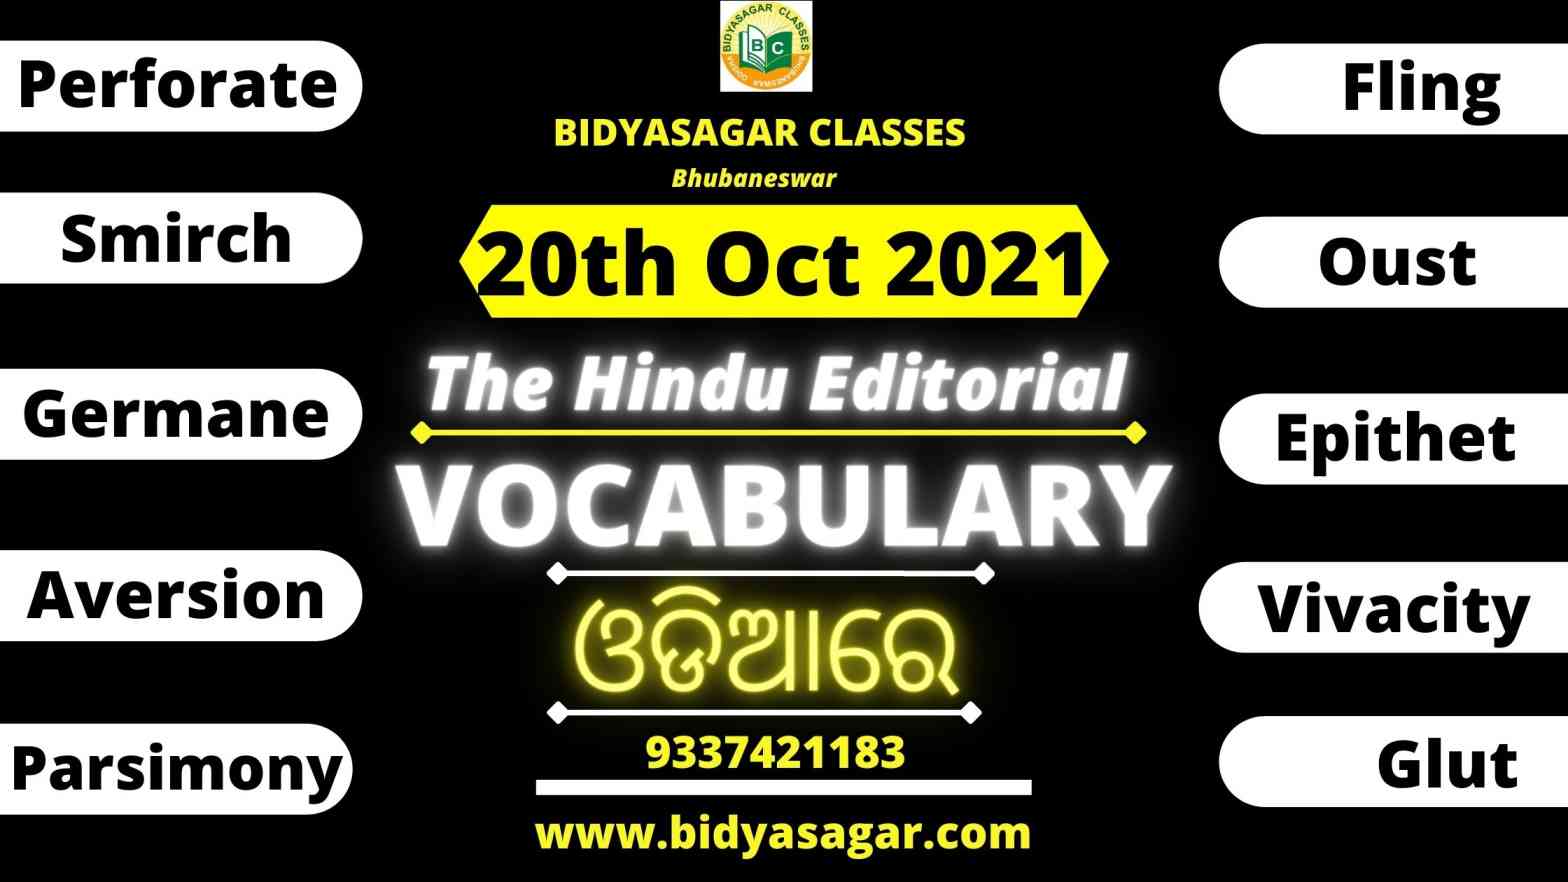 The Hindu Editorial Vocabulary of 20th October 2021